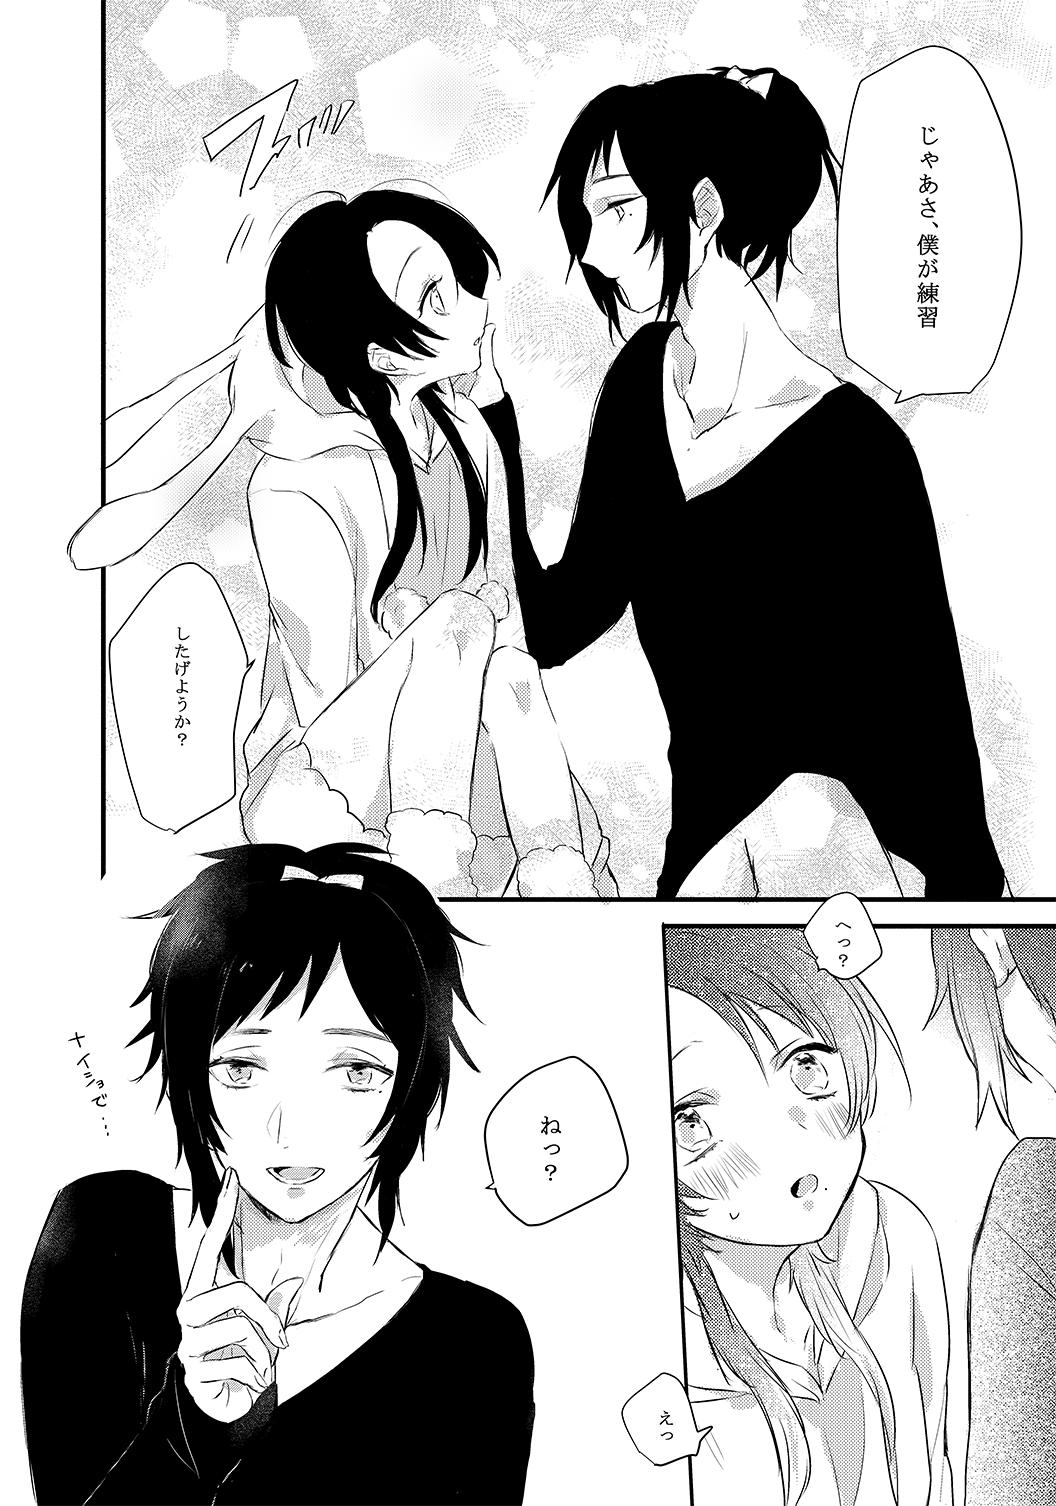 Thick BROTHER COMPLEX + SISTER COMPLEX - Touken ranbu Neighbor - Page 10